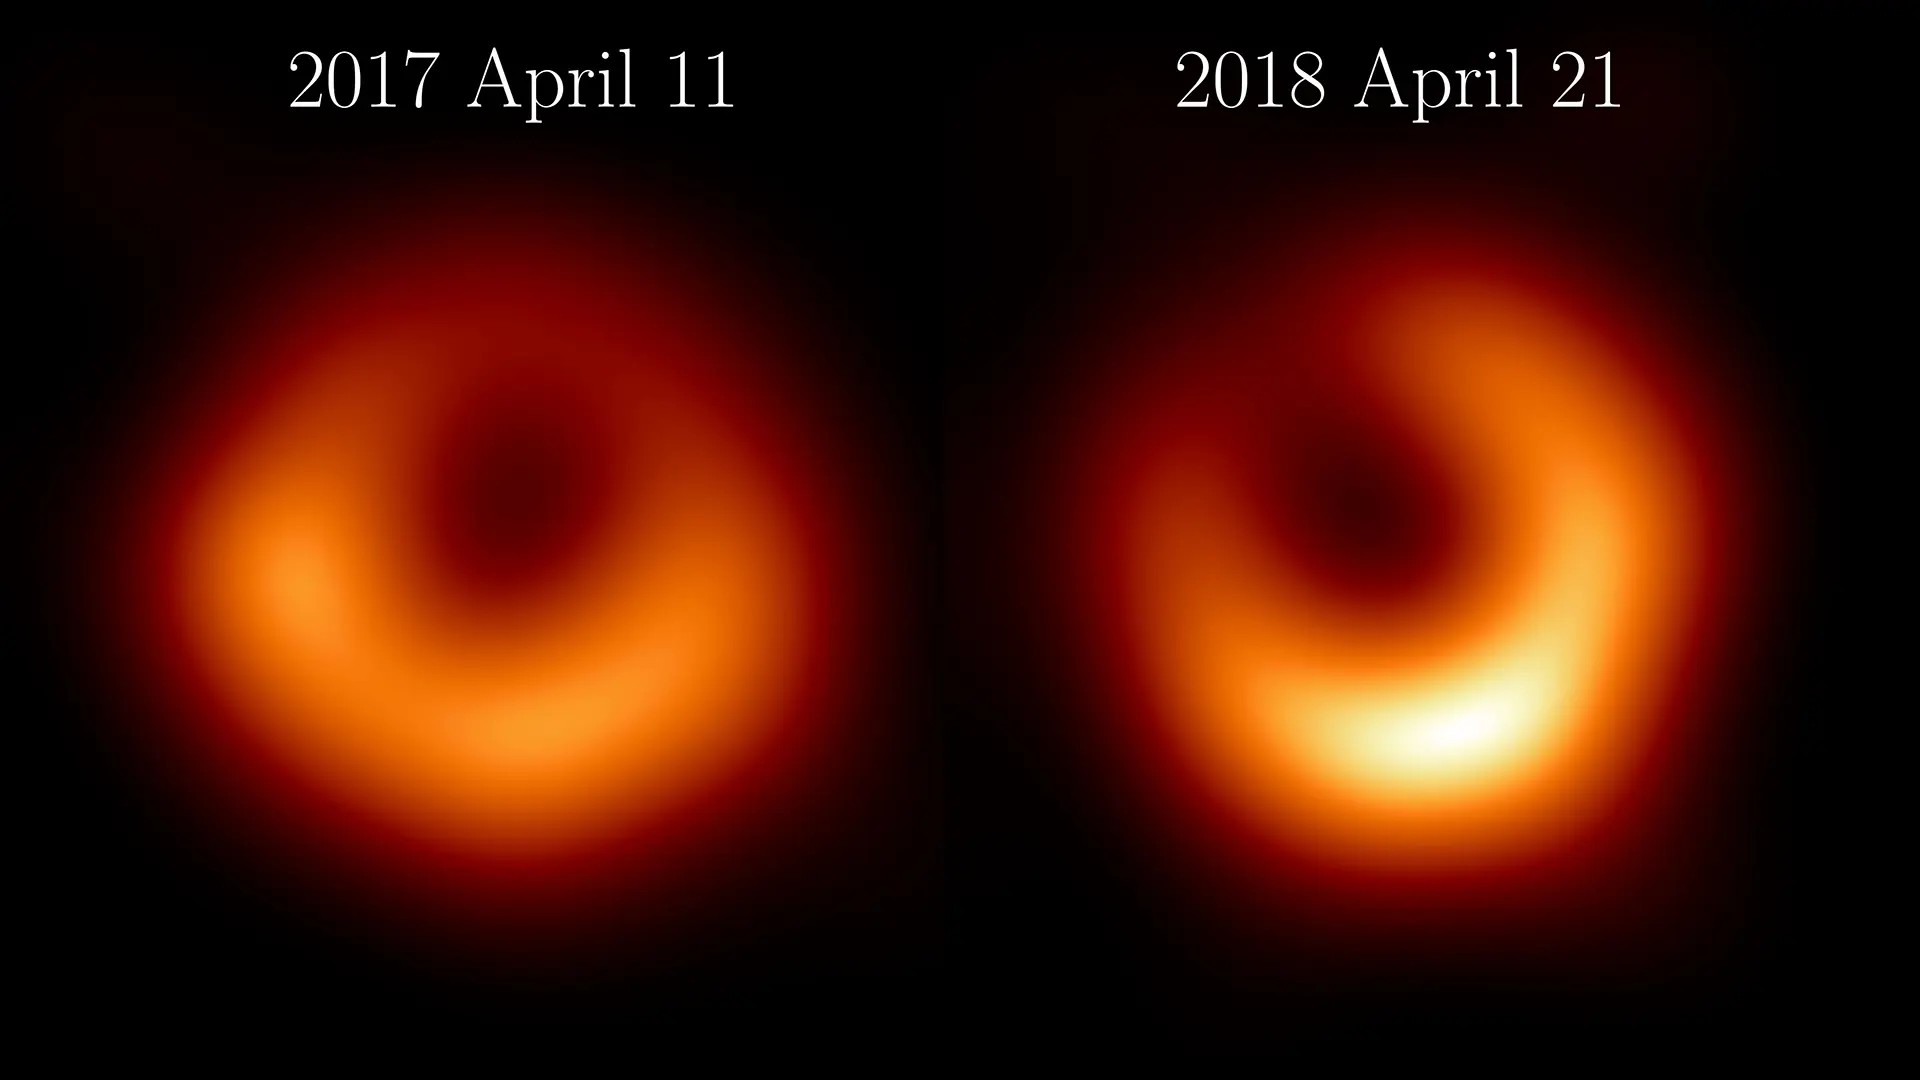 The black hole in M87, images taken in 2017 and 2018